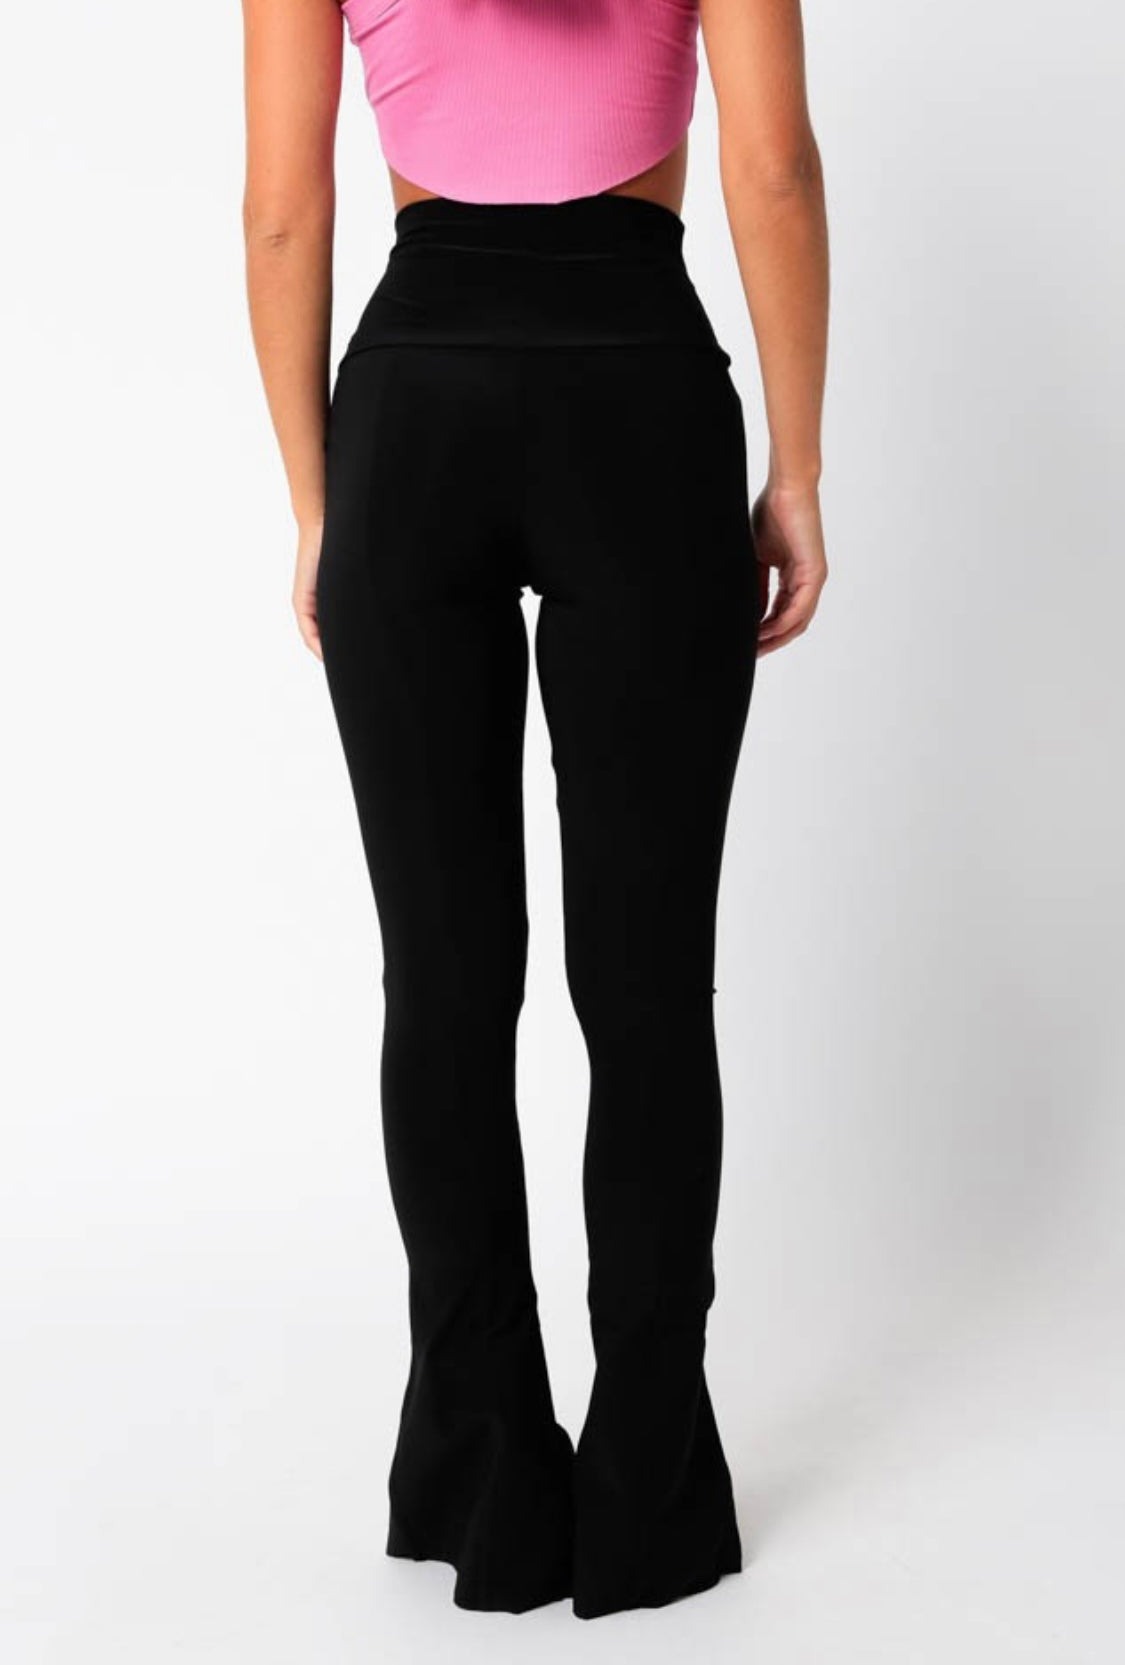 NEWEST ARRIVAL high-waisted slit front bottom yoga pant